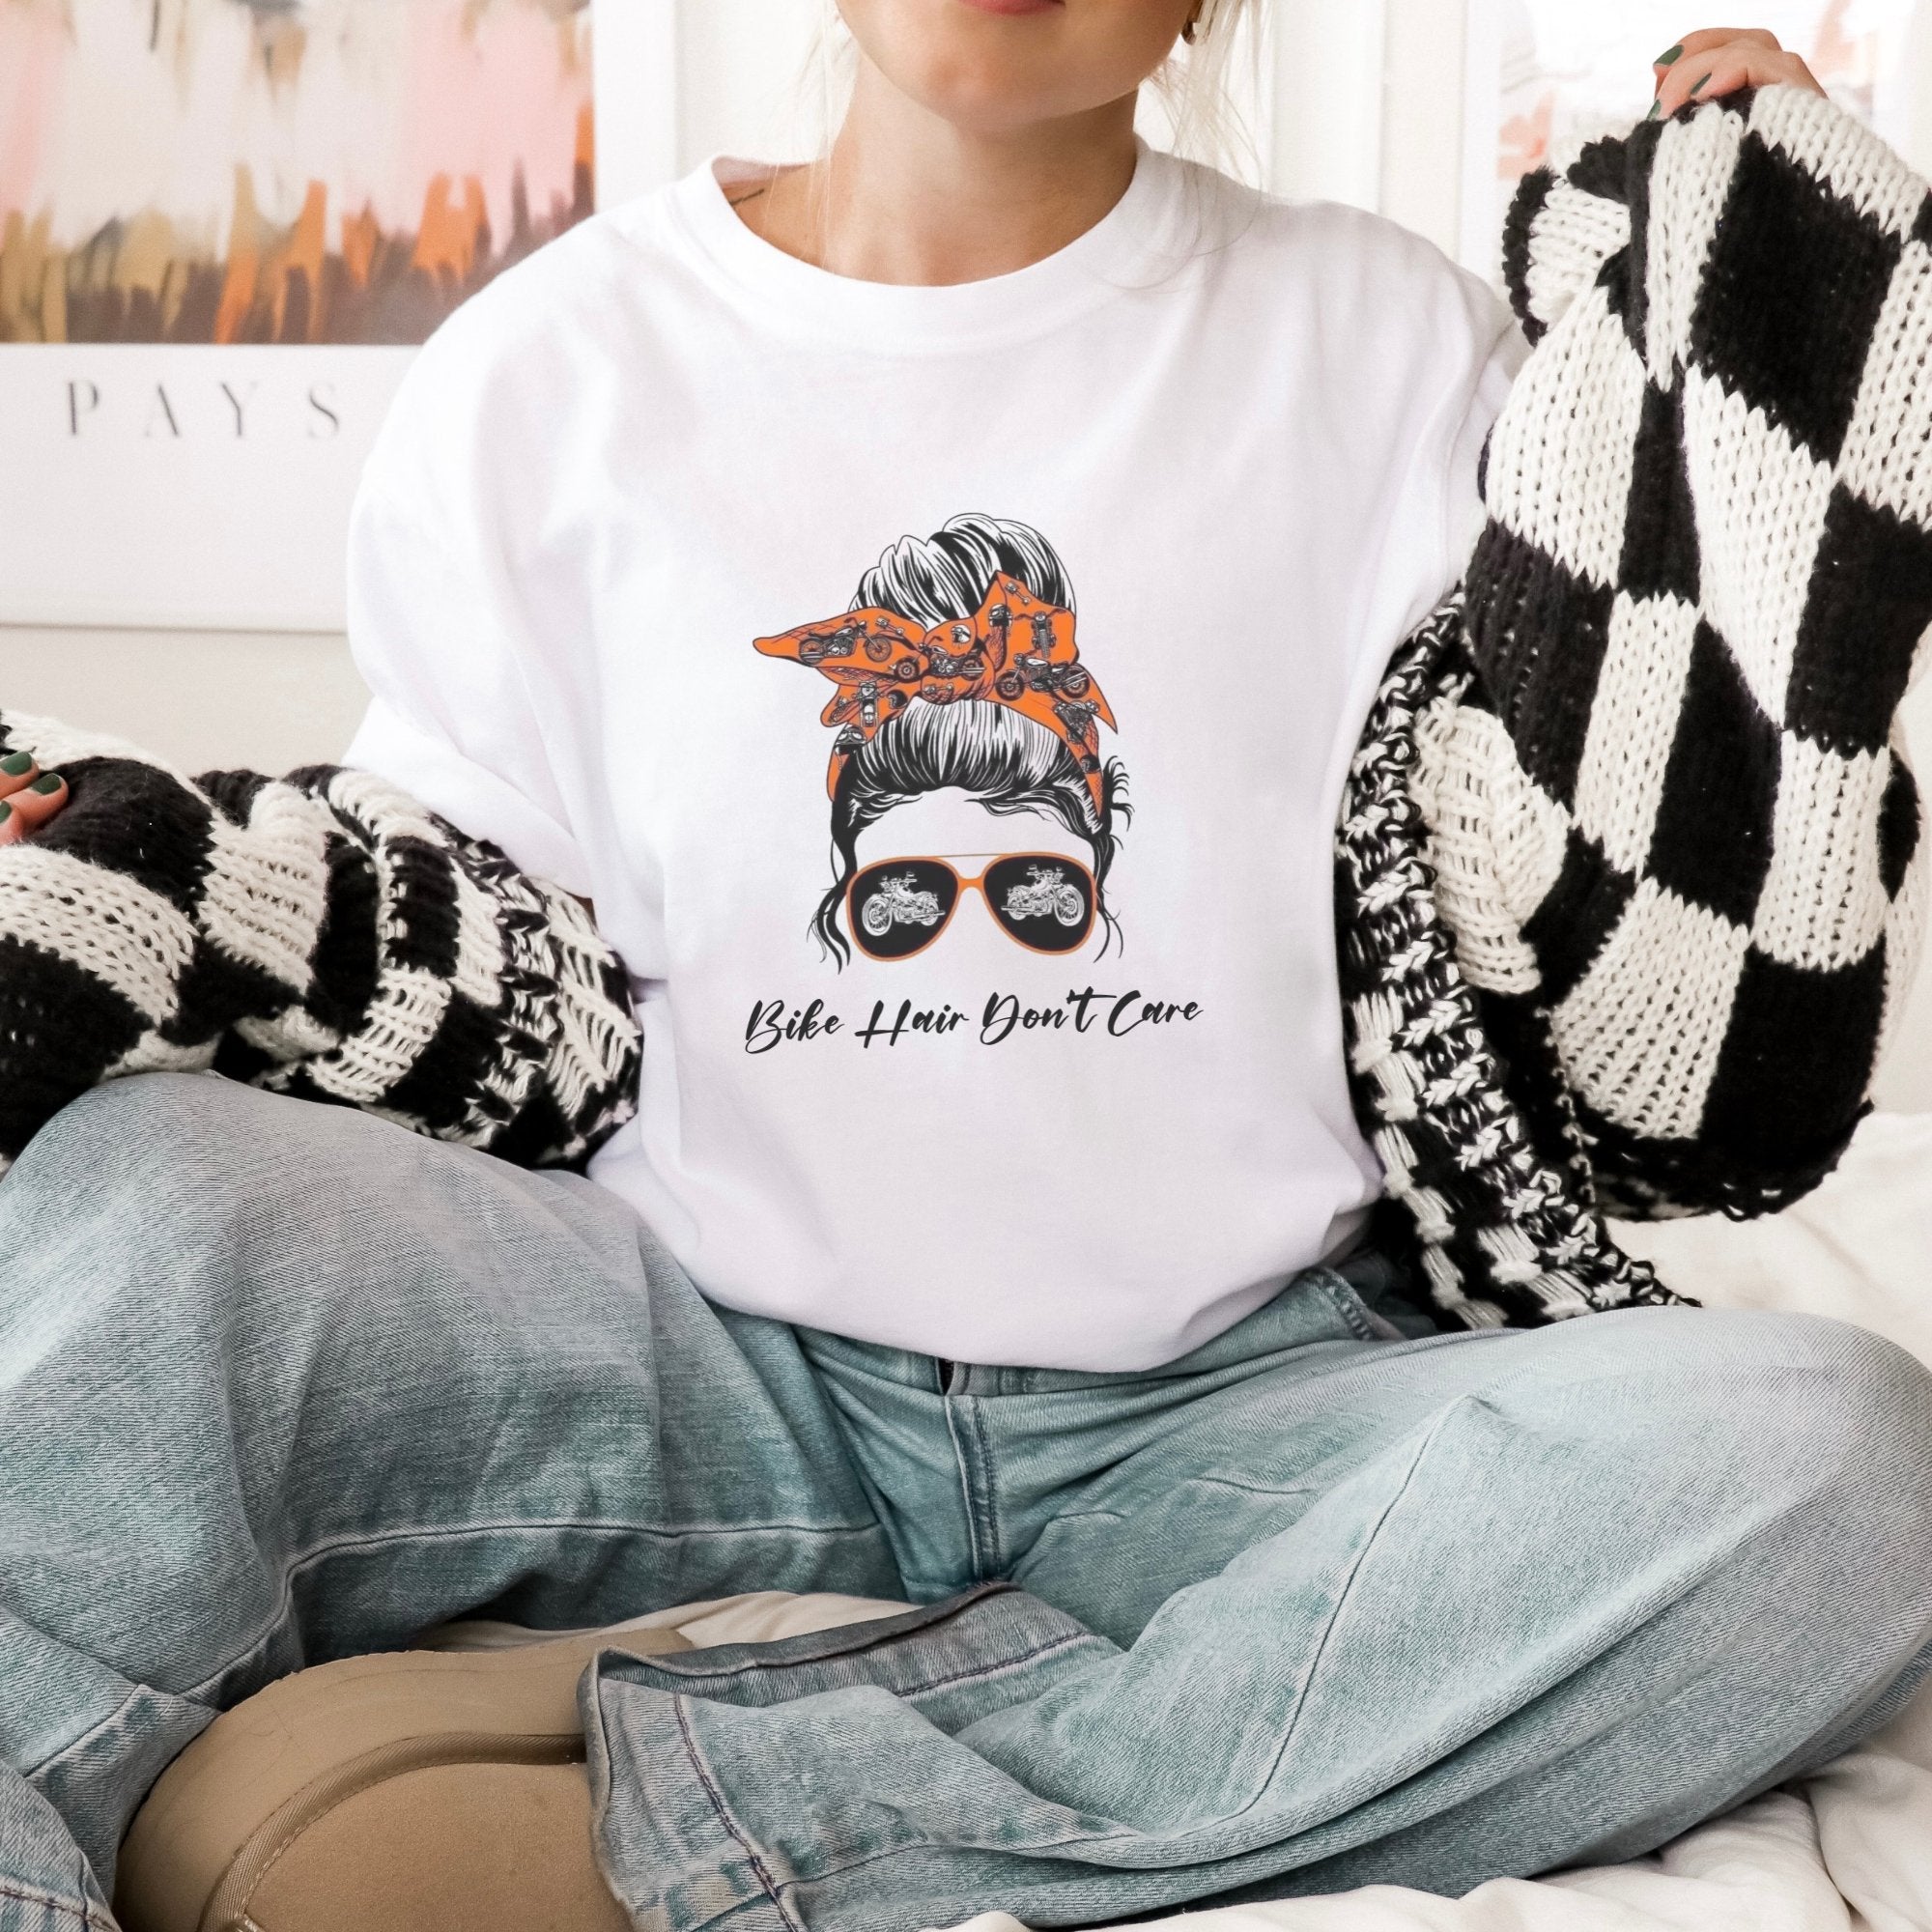 Bike Hair Don't Care Graphic Tee - Trendznmore